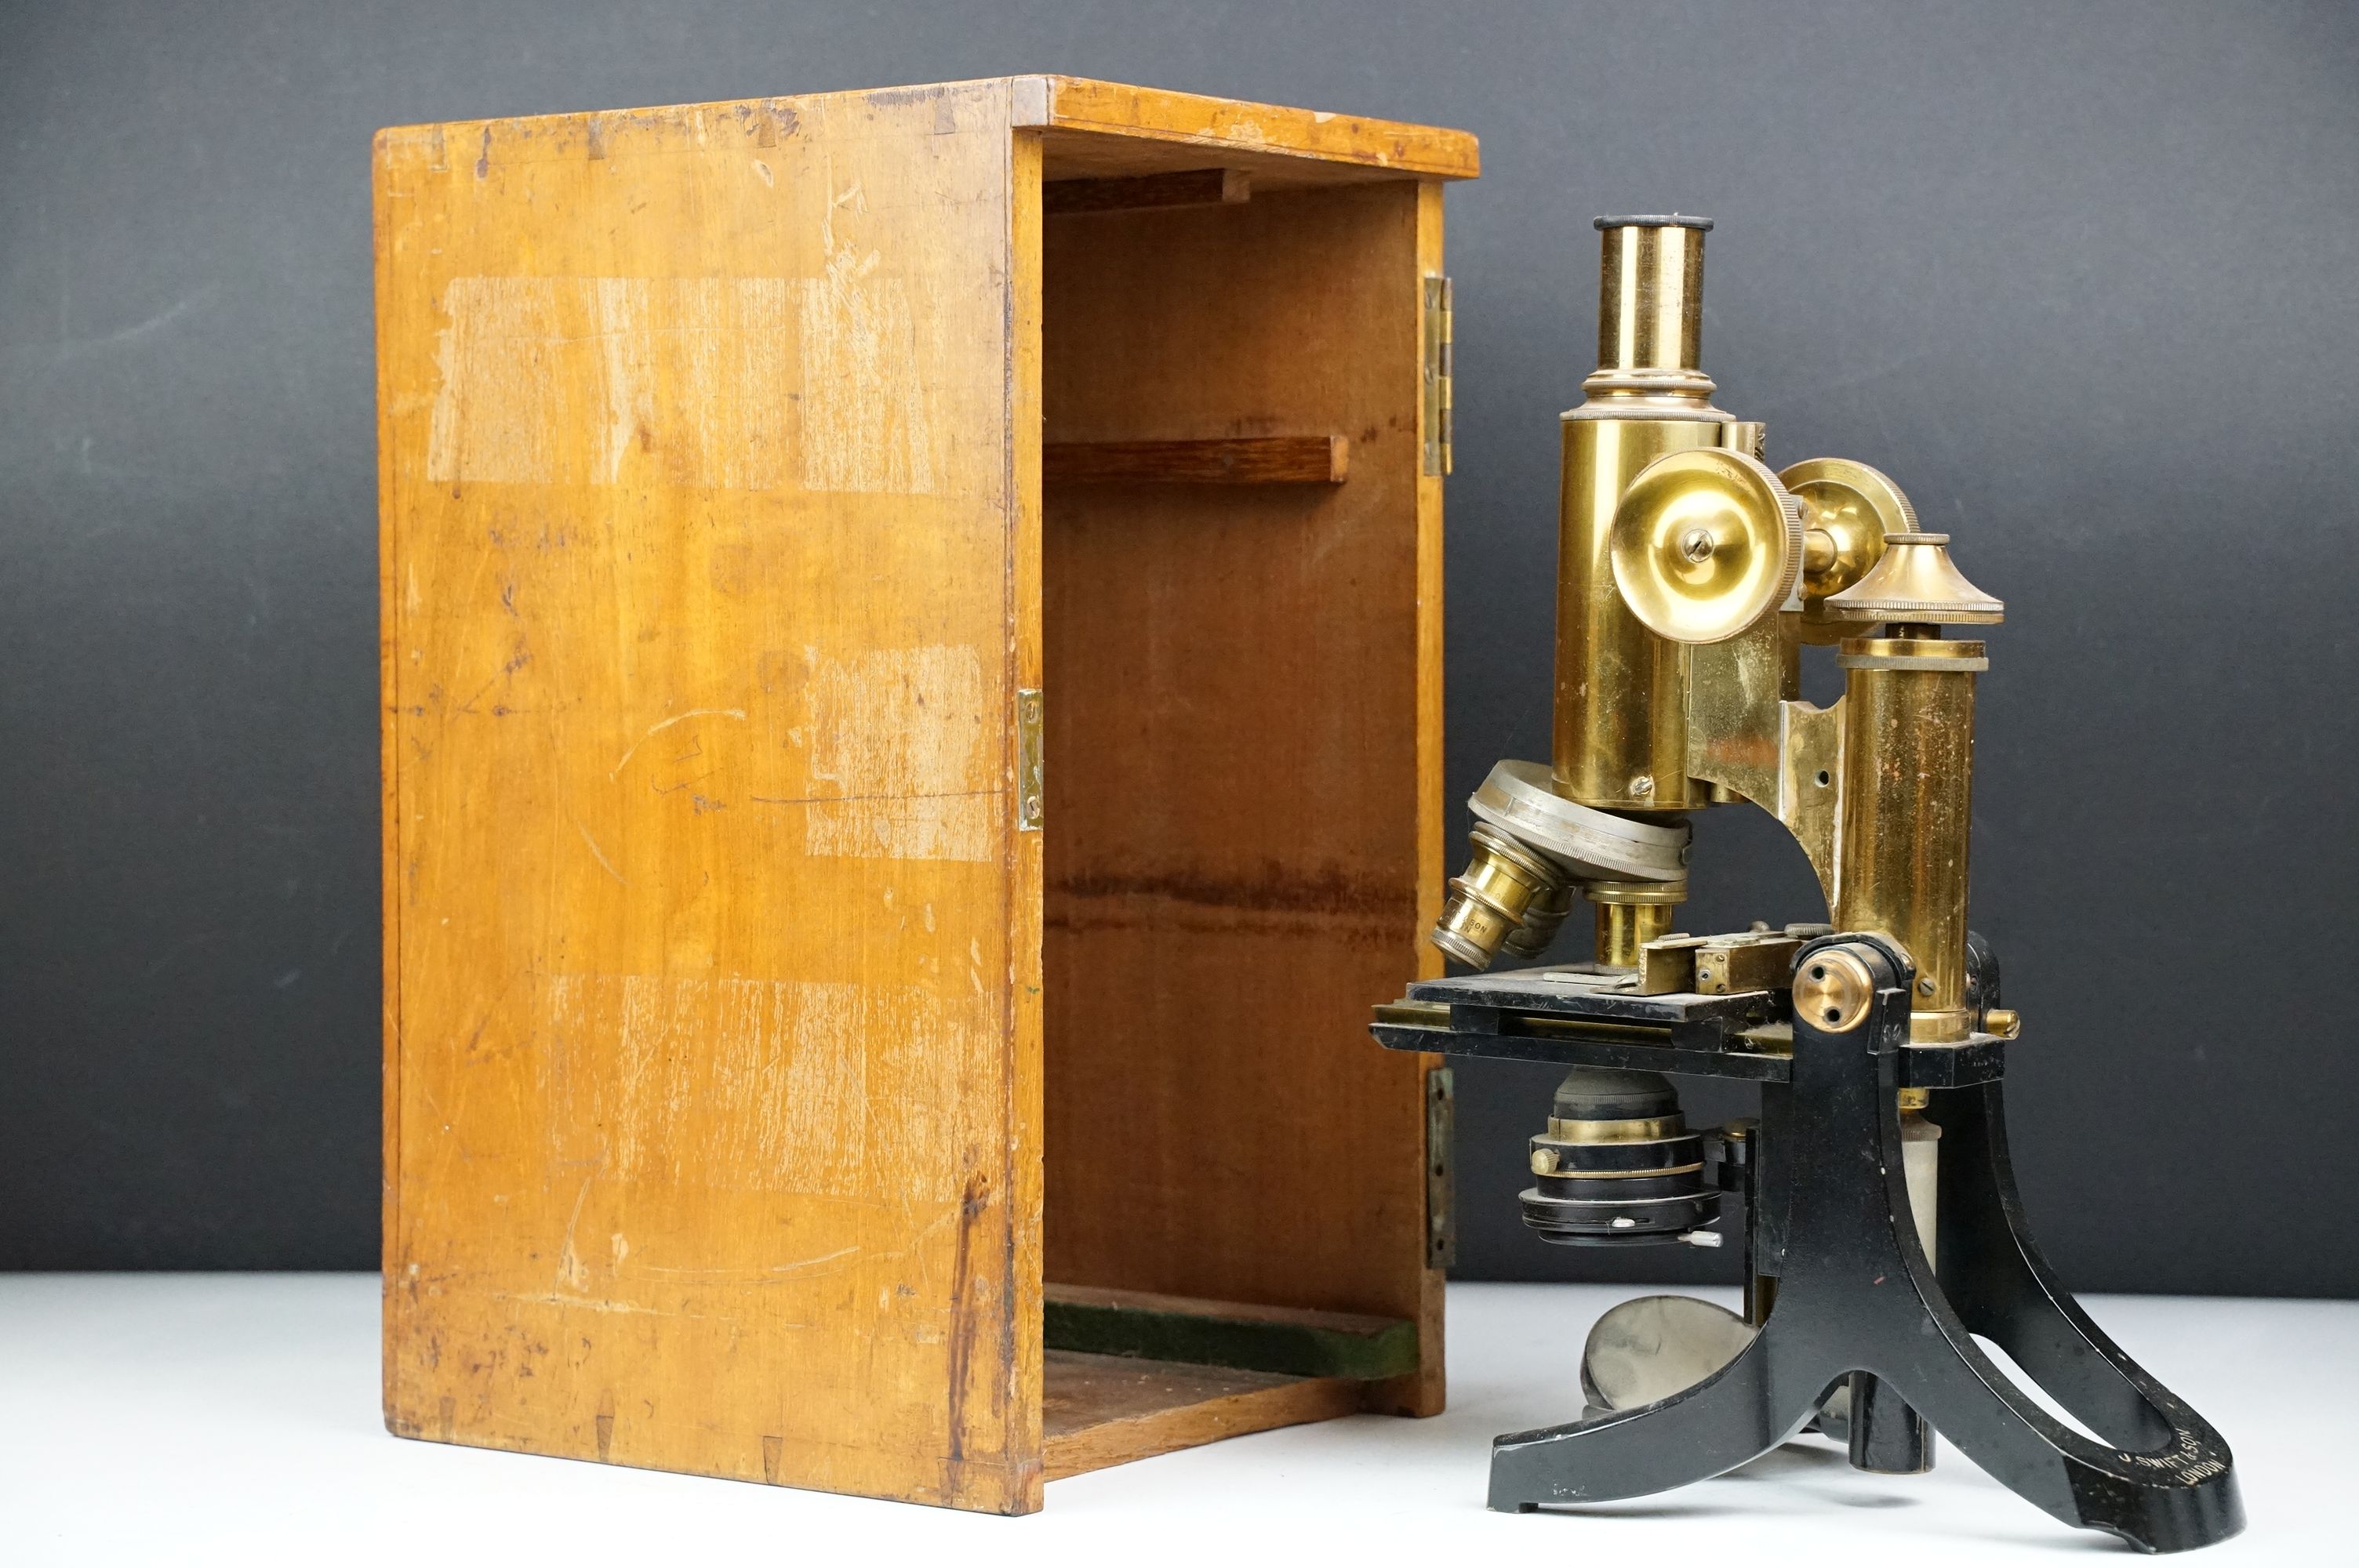 J. Swift & Son of London brass lacquered microscope, housed within a wooden carry case (missing